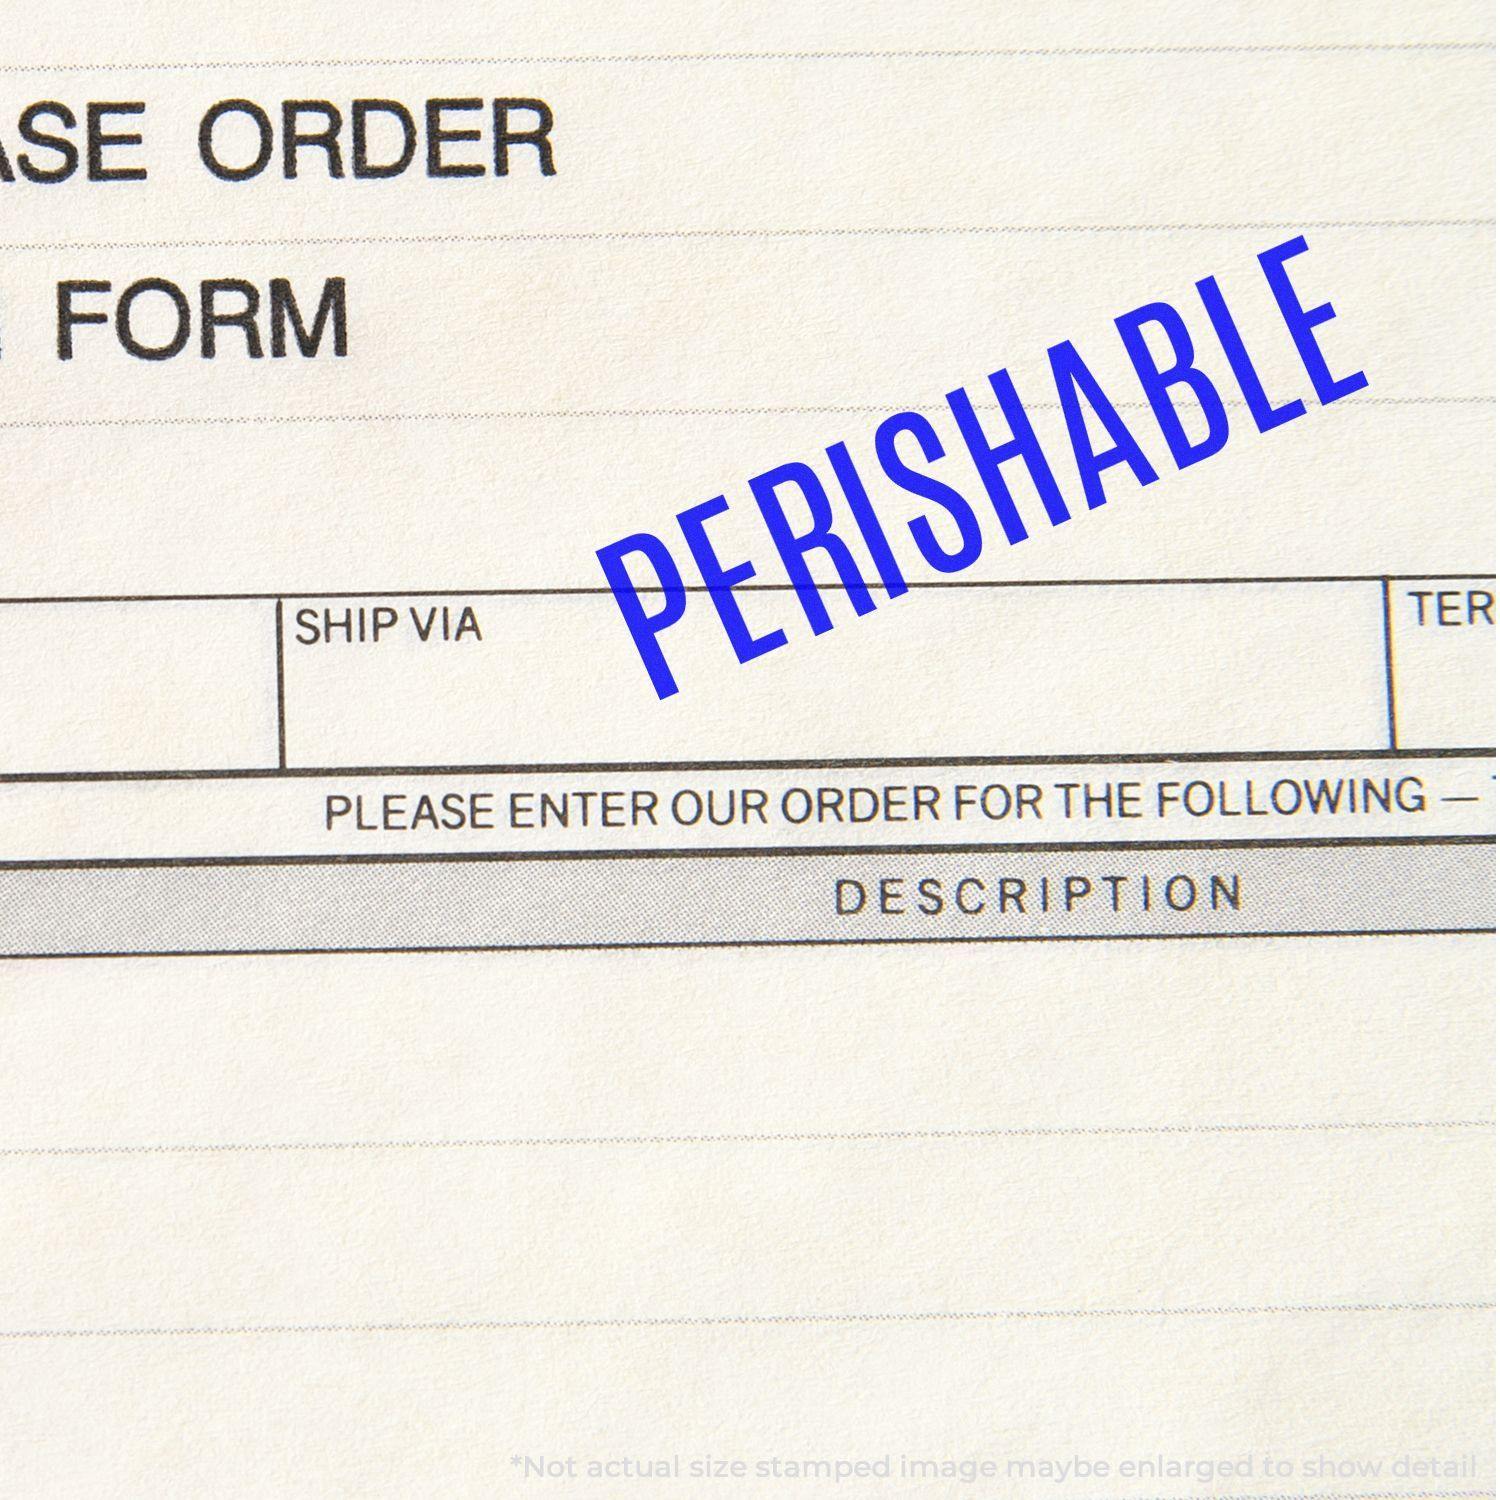 A stock office rubber stamp with a stamped image showing how the text "PERISHABLE" in a large font is displayed after stamping.